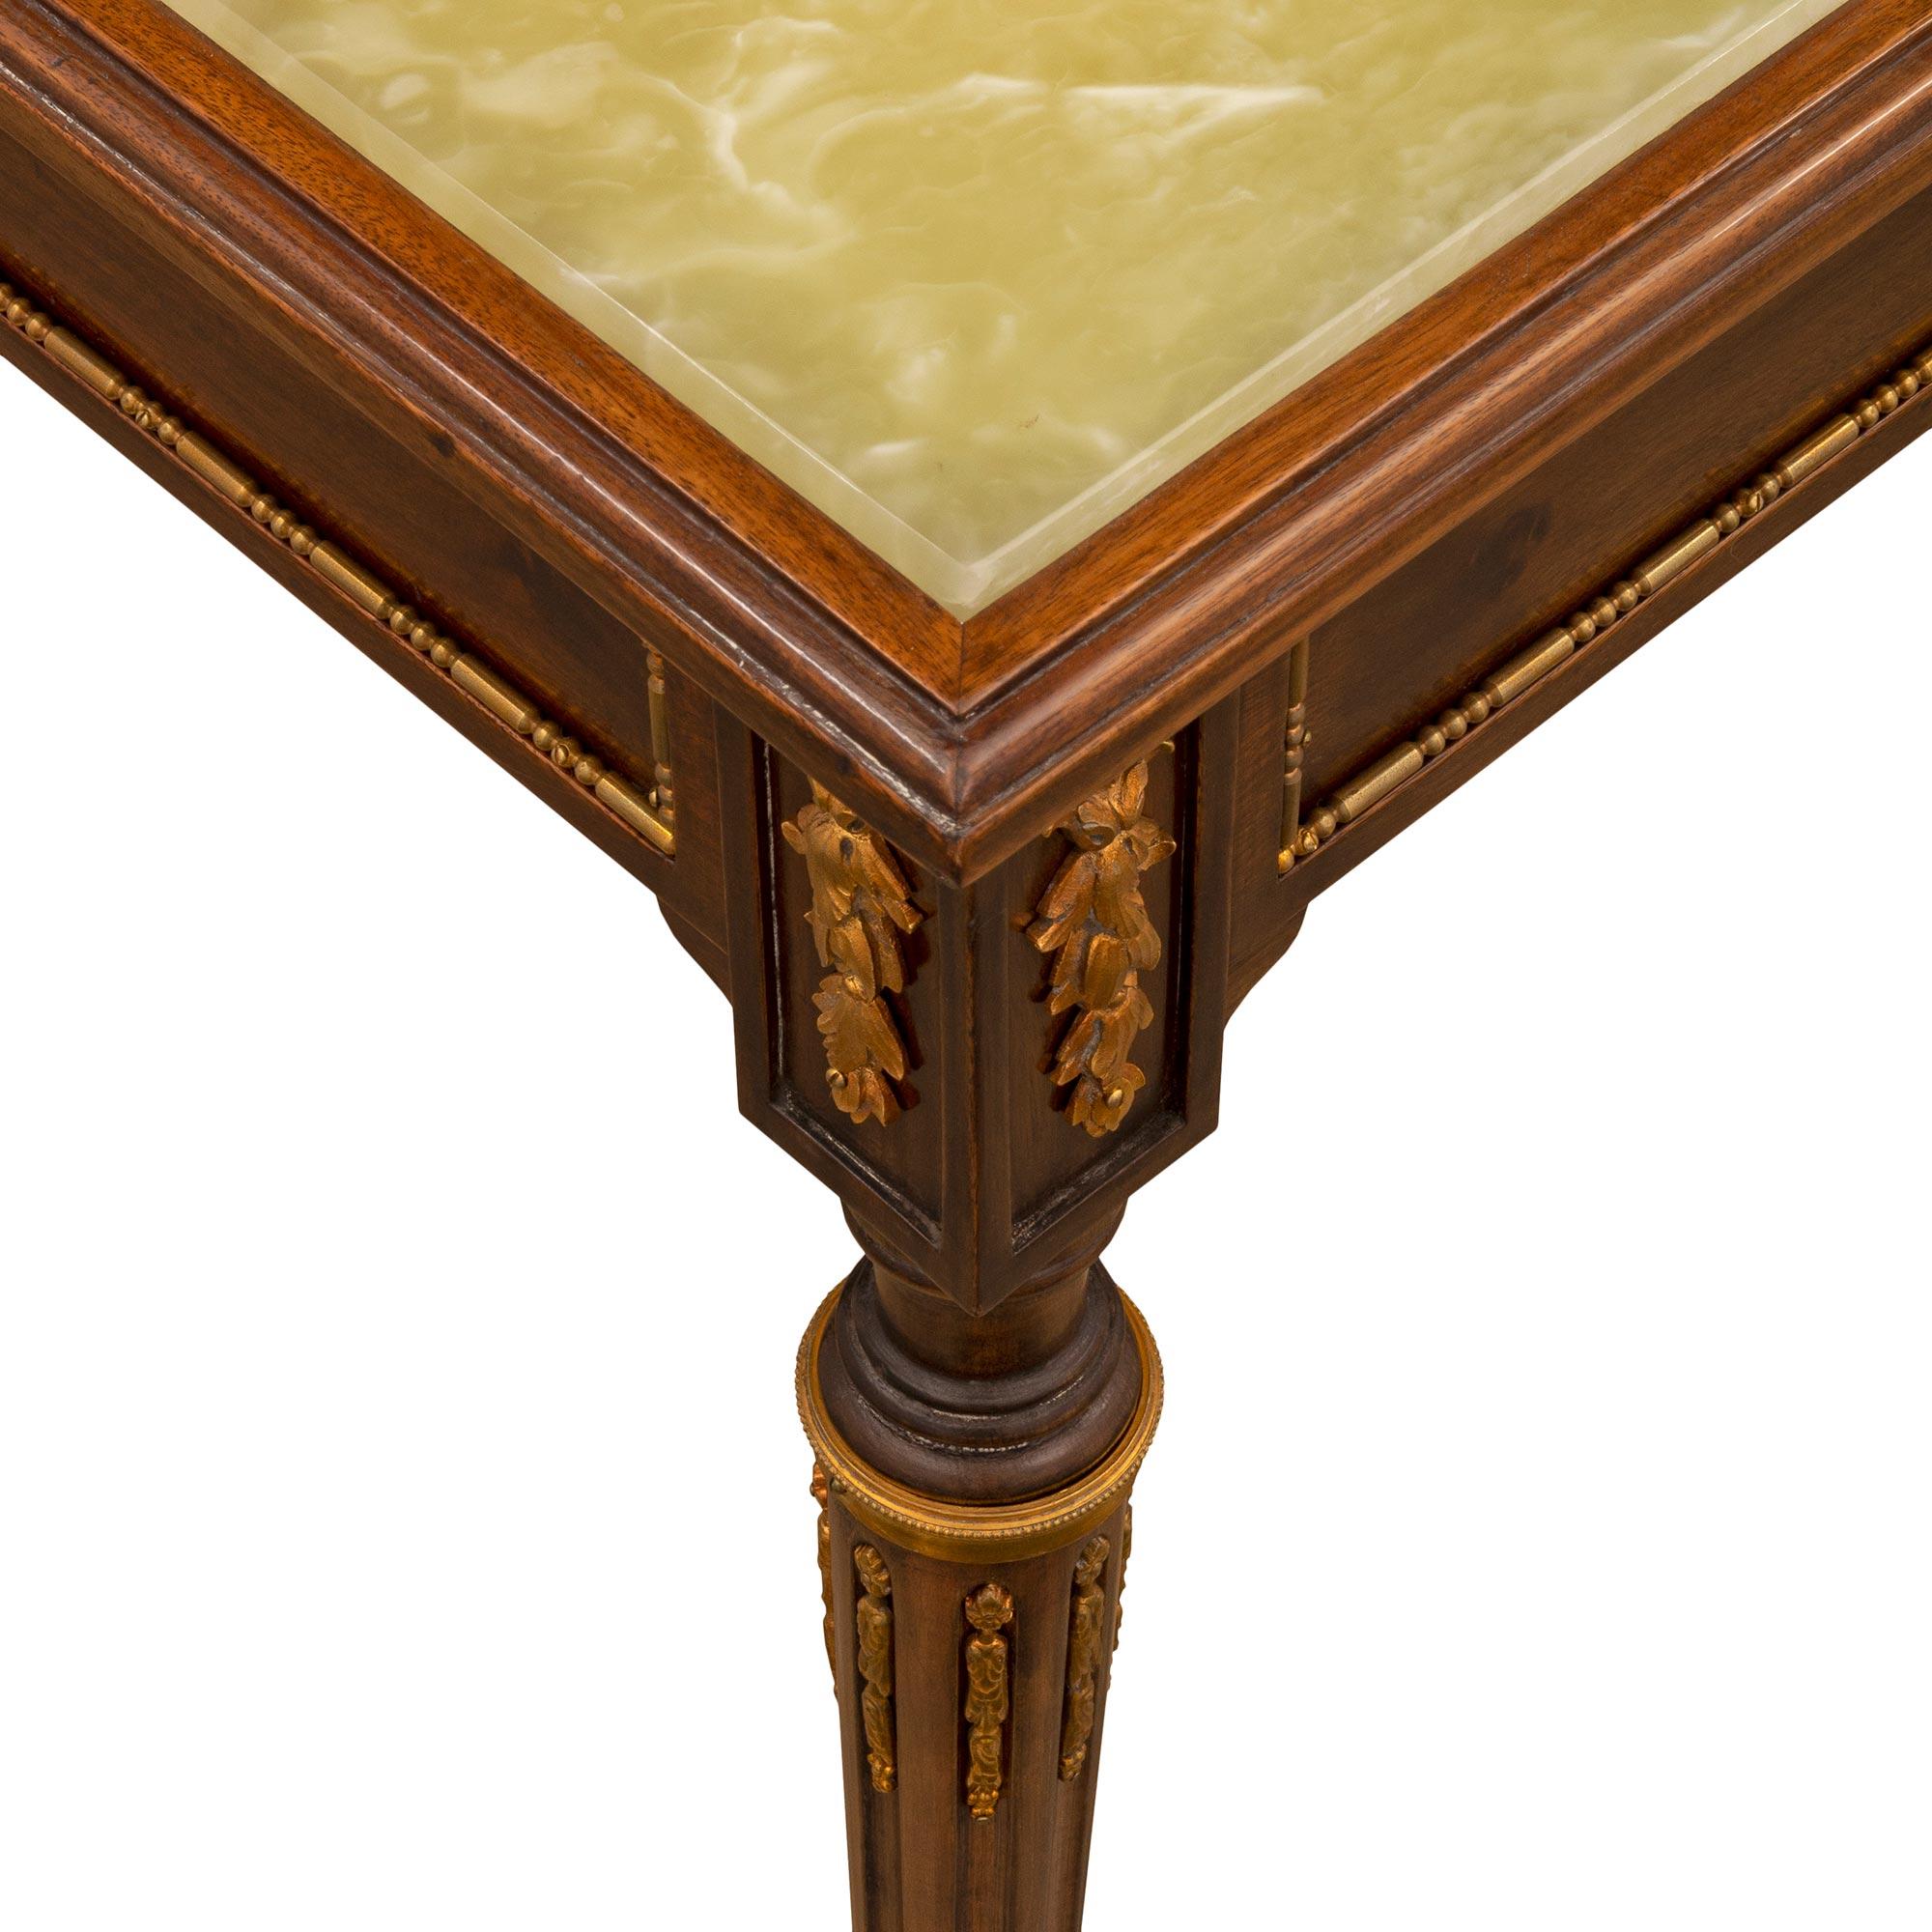 French 19th Century Louis XVI Style Mahogany, Onyx and Ormolu Table For Sale 2